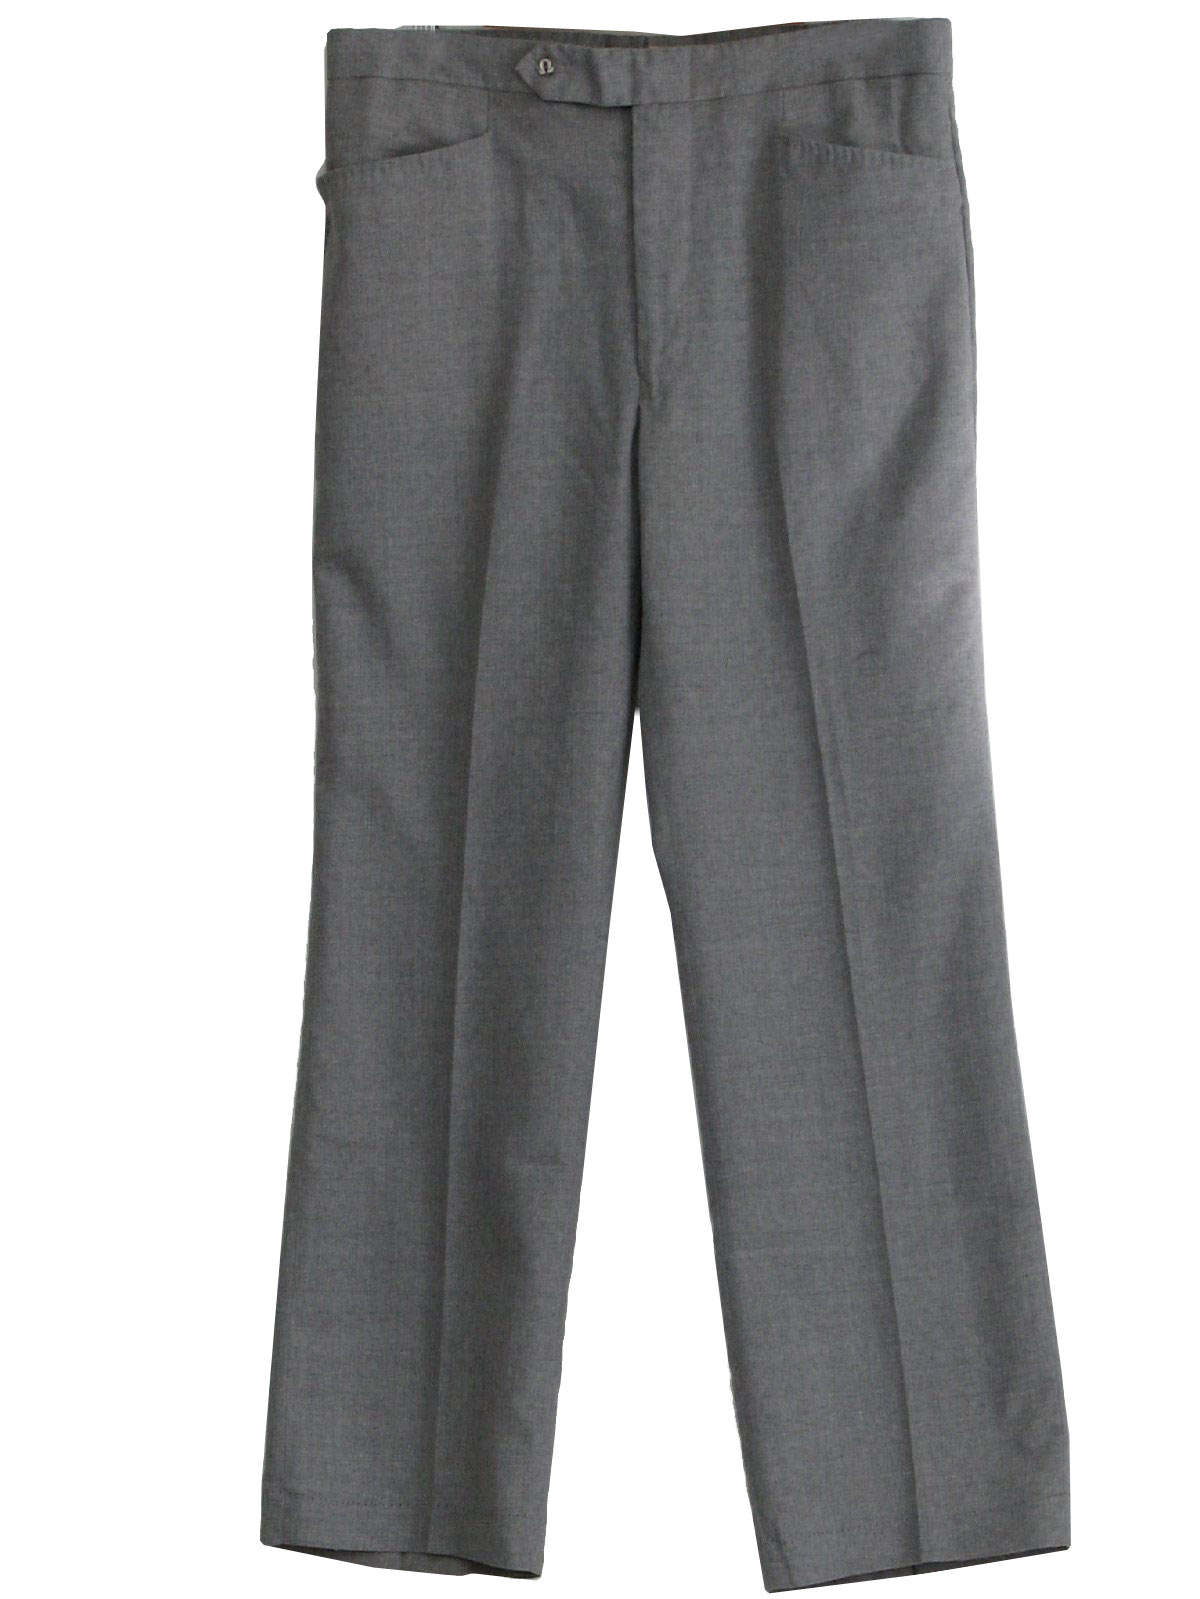 1970's Pants: 70s -no label- Mens heather grey polyester and wool blend ...